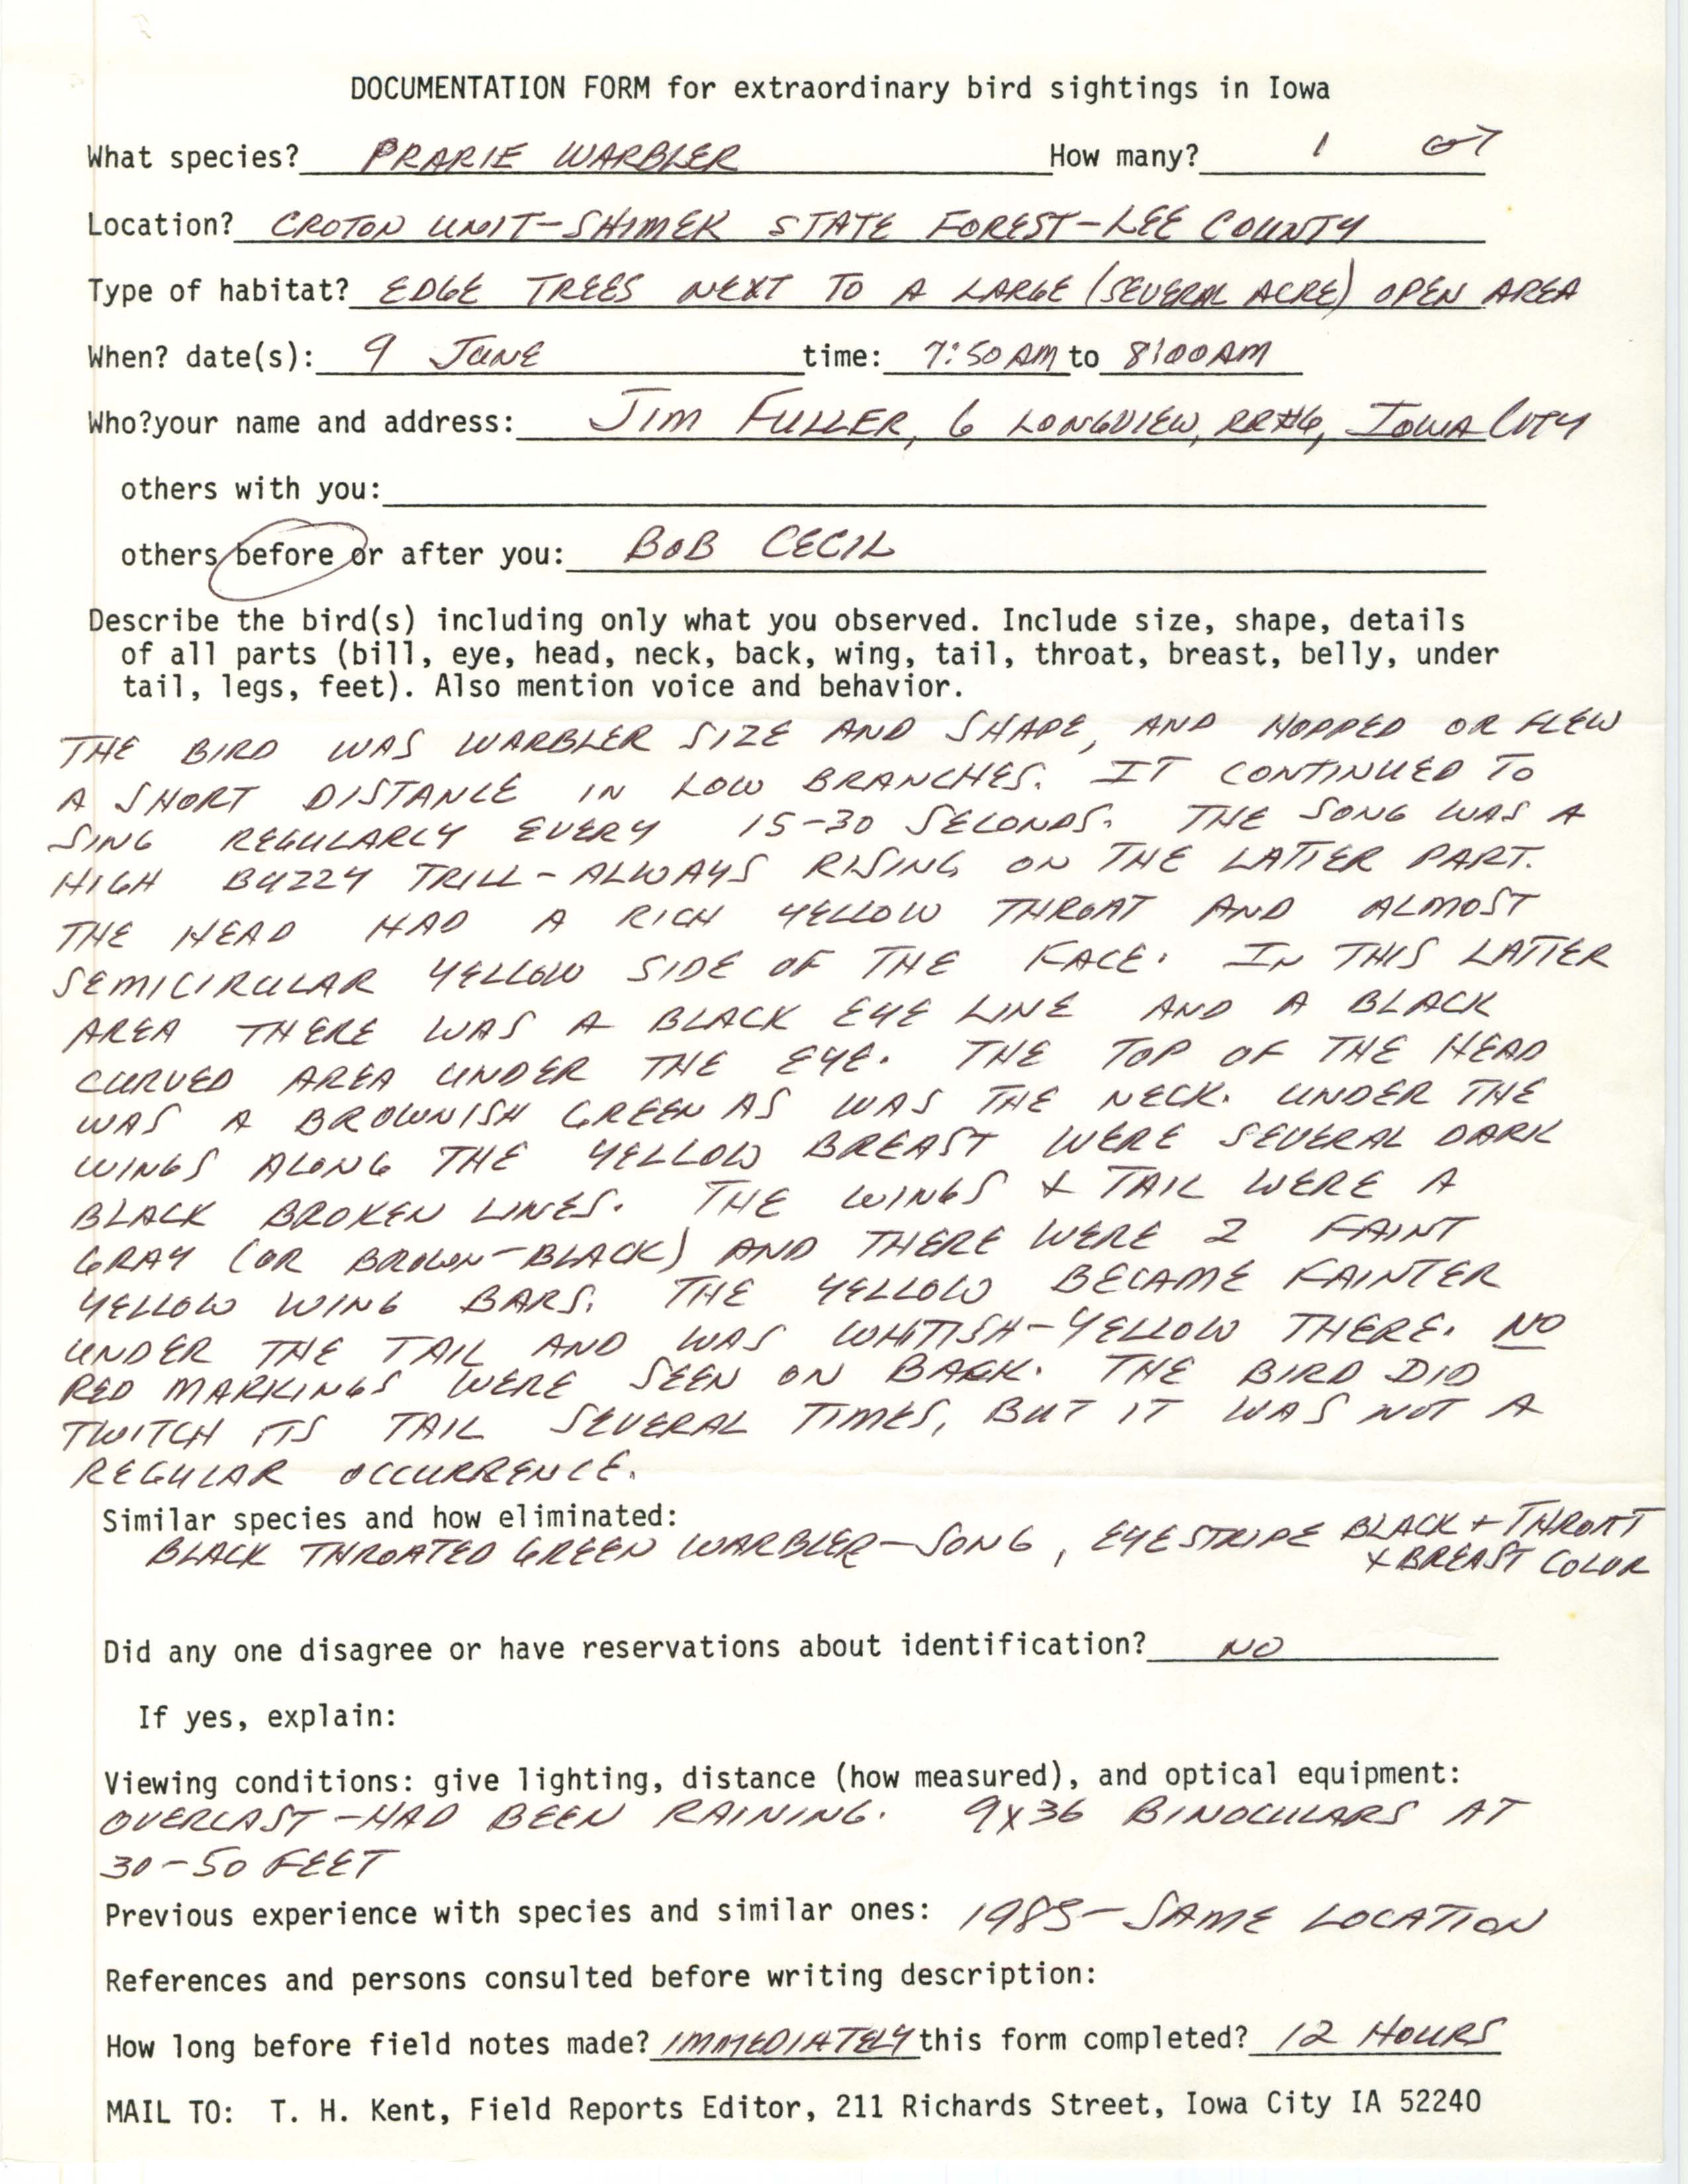 Rare bird documentation form for Prairie Warbler at the Croton Unit in Shimek State Forest, 1986